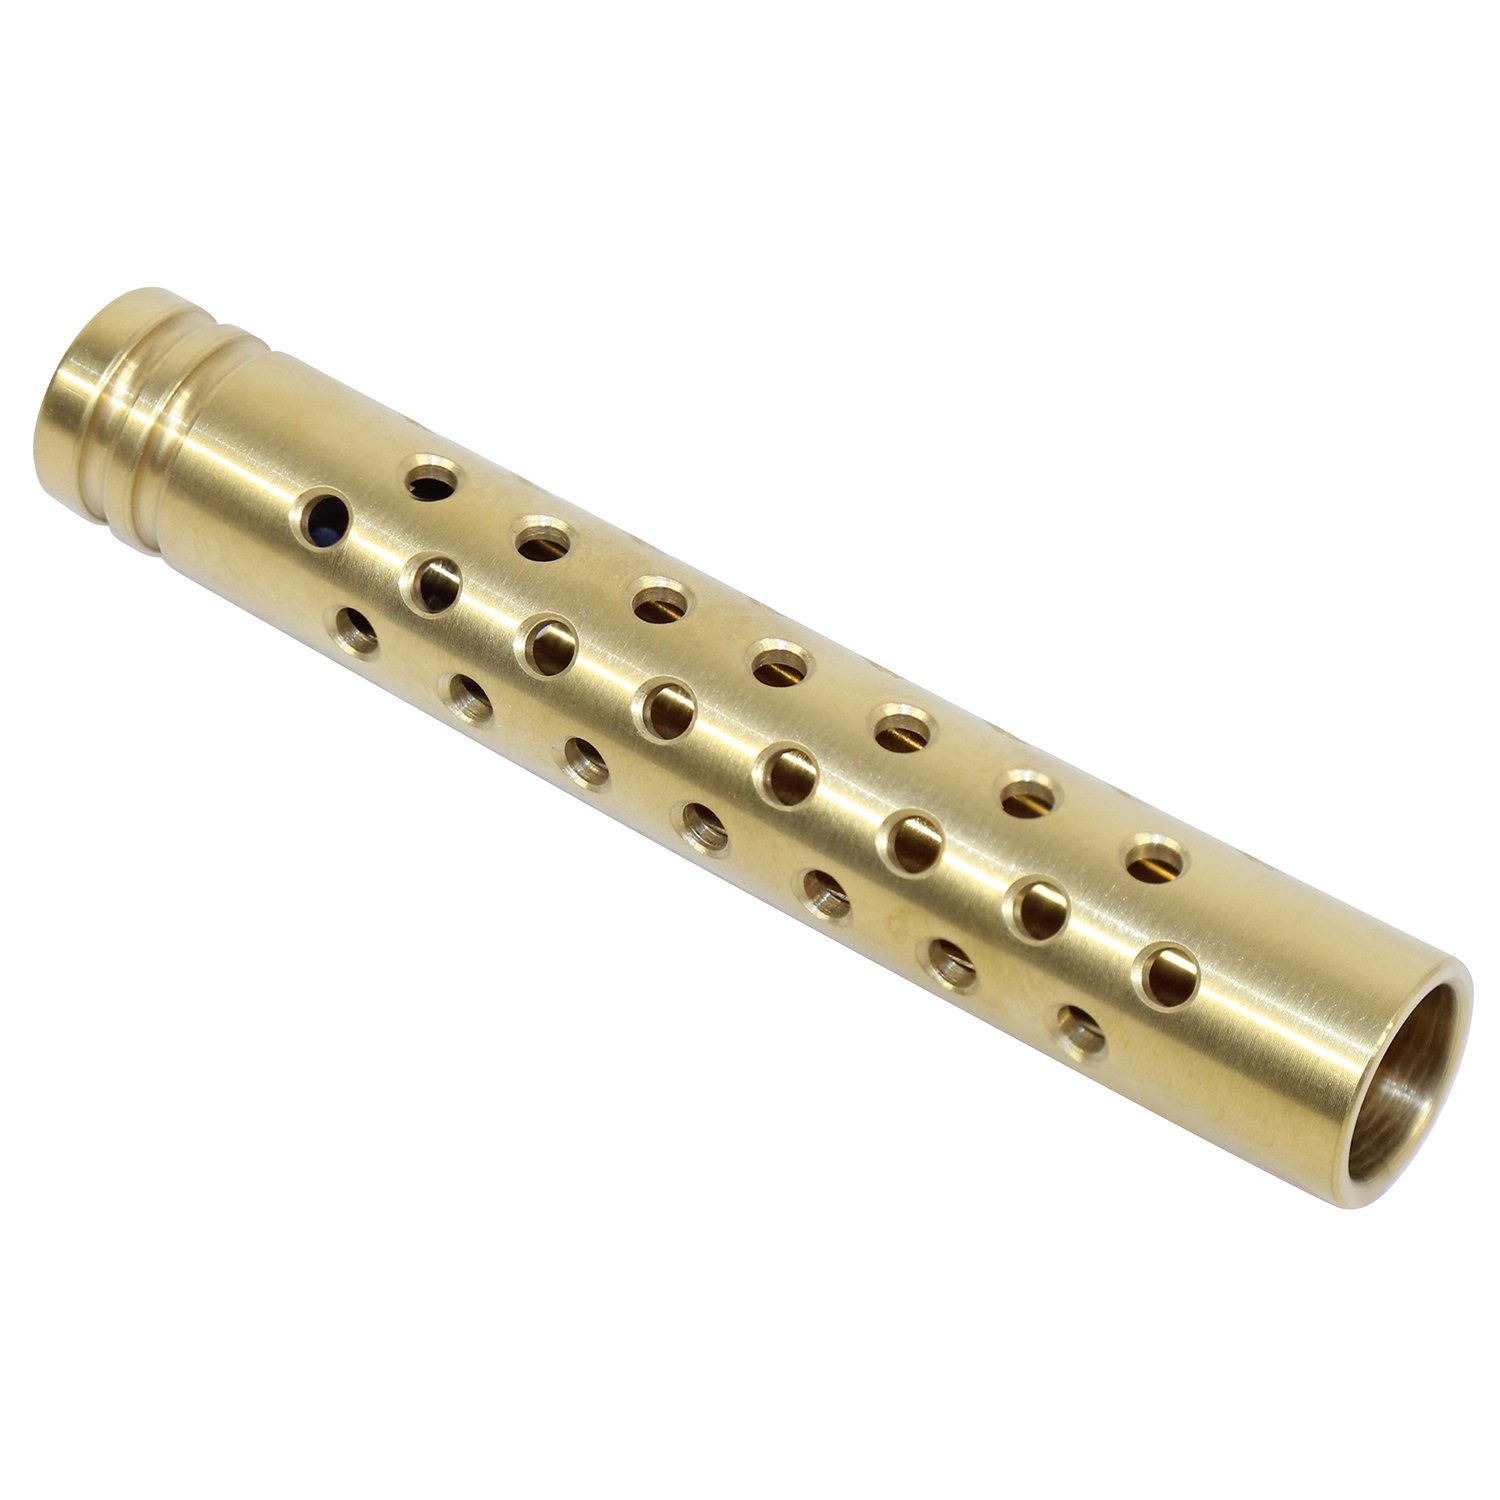 A 5.5-inch AR-15 muzzle brake with a distinctive gold tint coating and multiple vent holes.